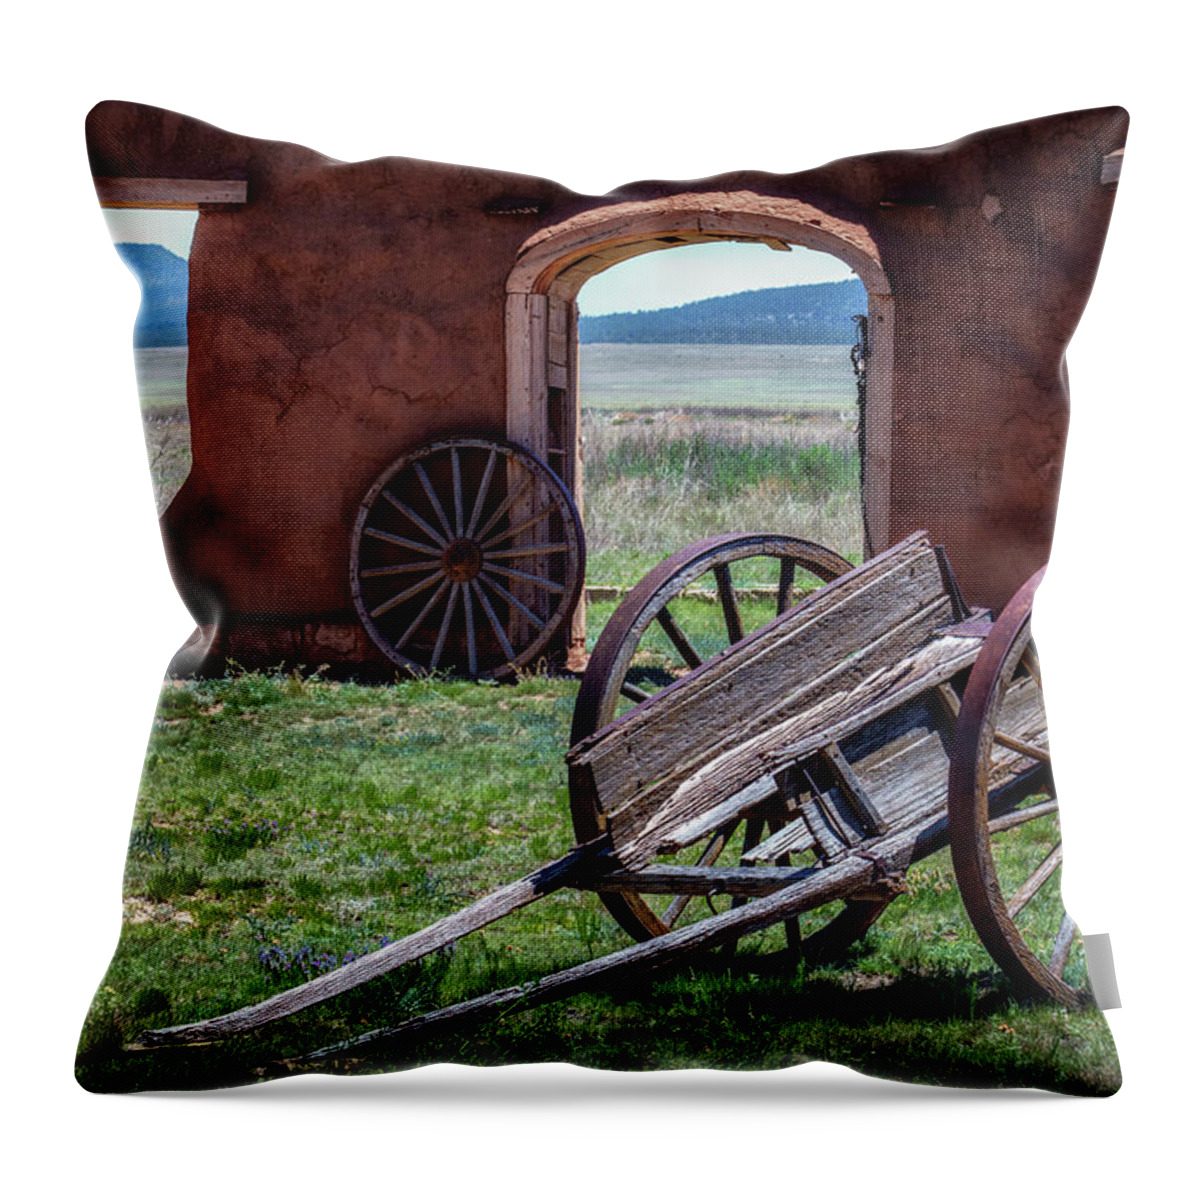 New Mexico Throw Pillow featuring the photograph Wagon Wheels by James Barber